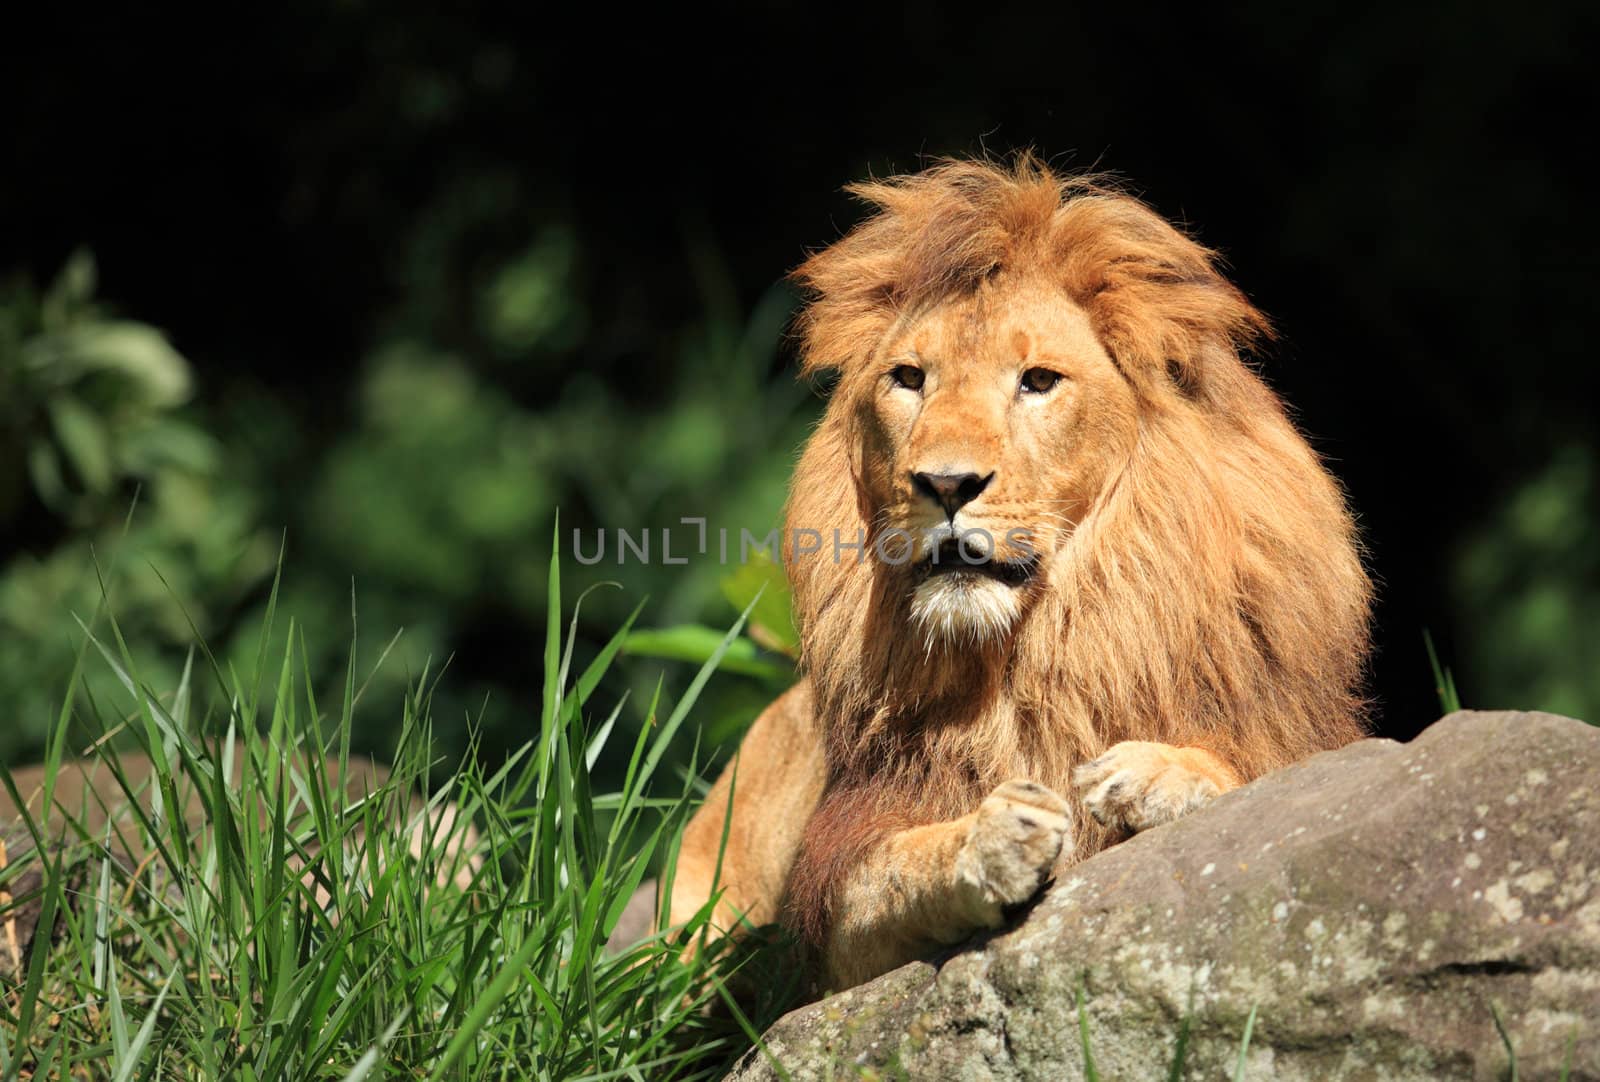 Male Lion in the wild by photosoup